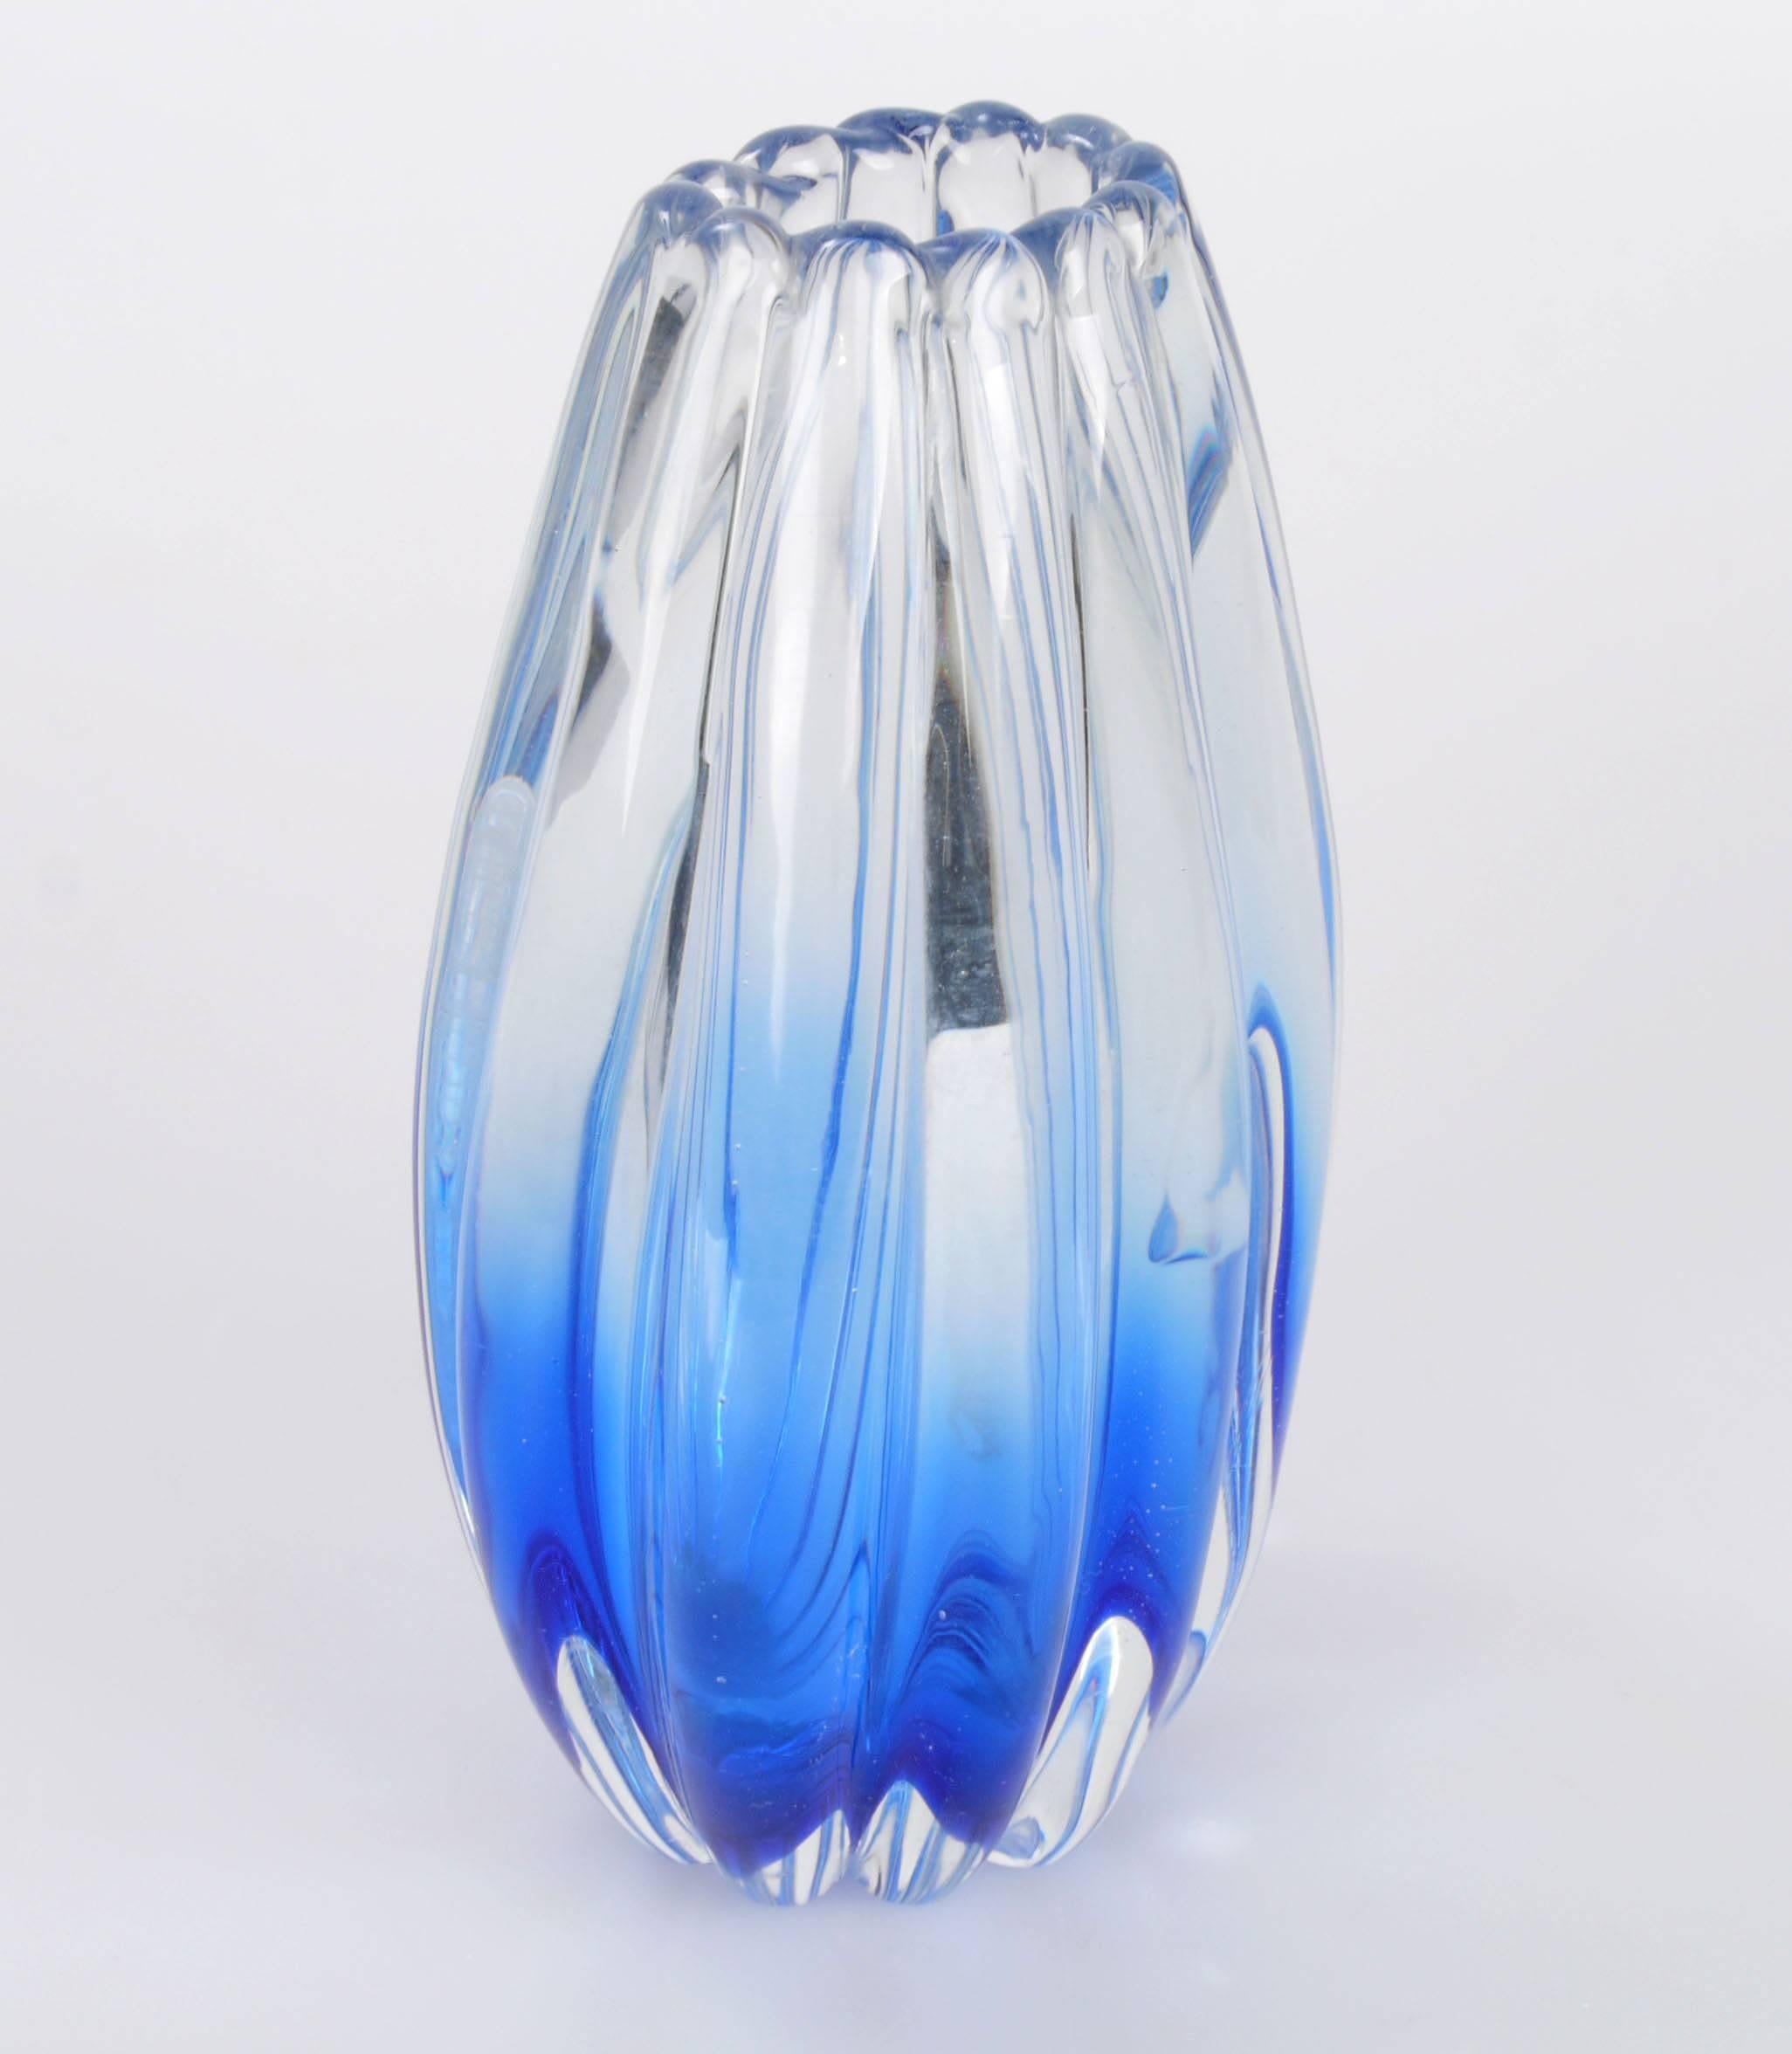 Elegant Barovier & Toso handblown Murano glass vase in clear and blue tone.
The vase is signed underneath.